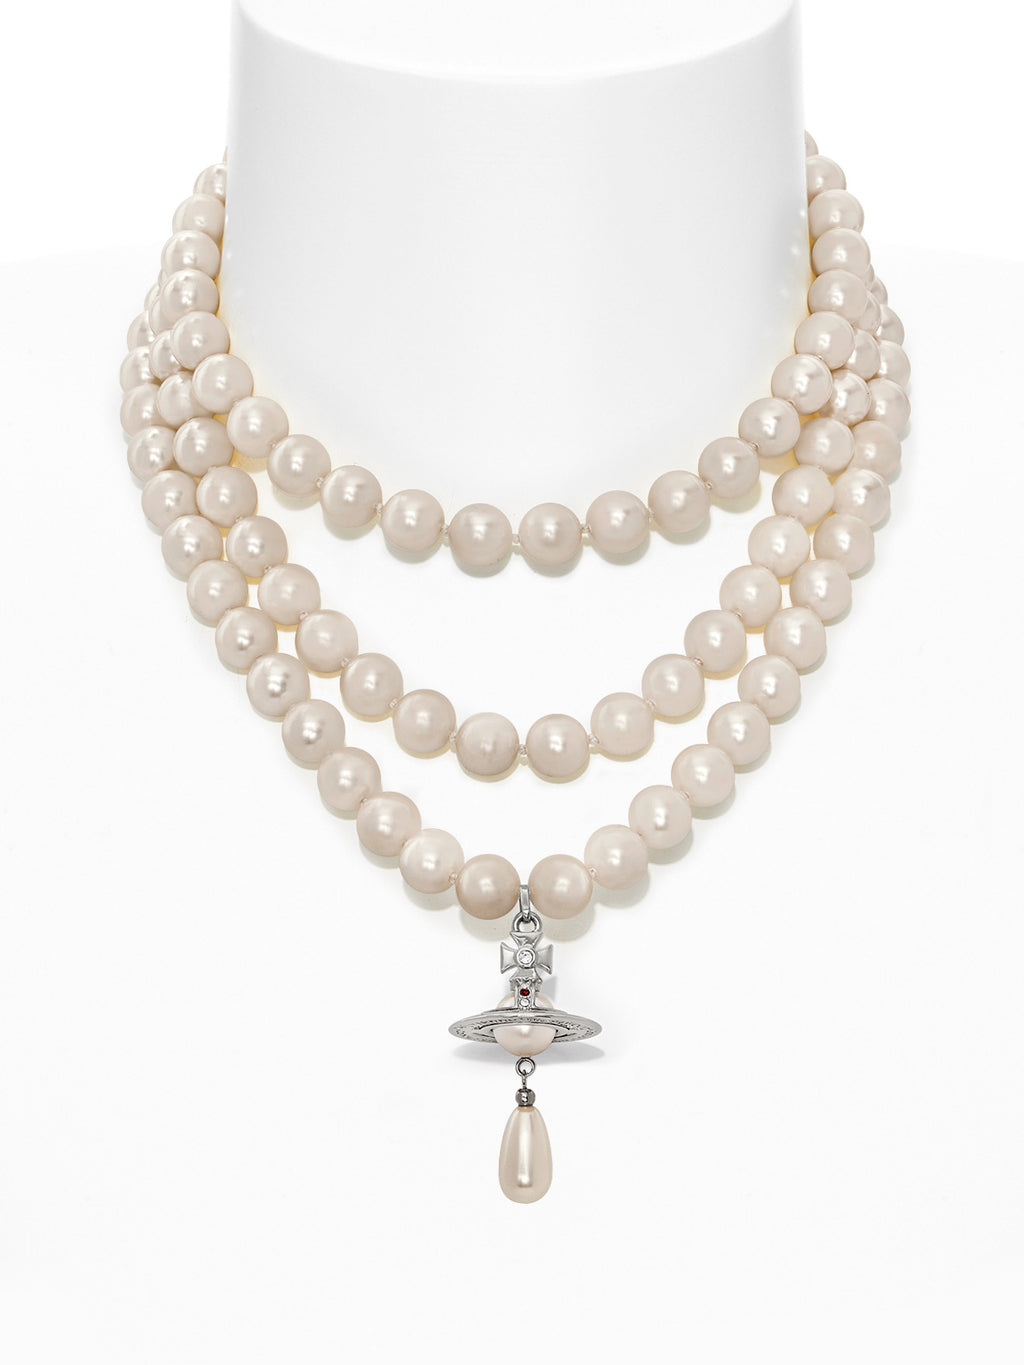 VIVIENNE WESTWOOD - Olympia ruthenium-plated brass and pearl necklace |  Selfridges.com